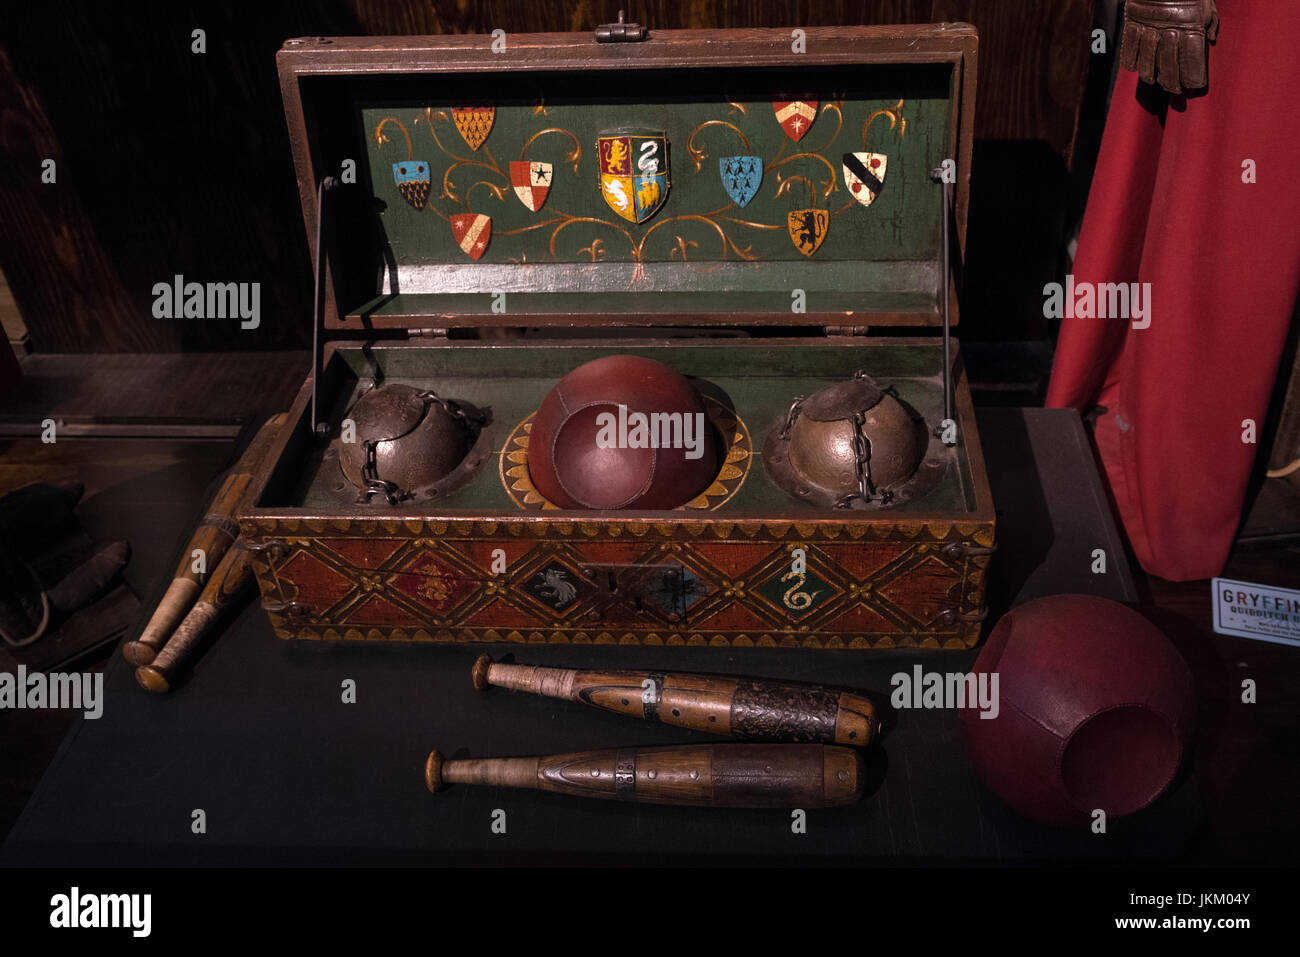 LEAVESDEN, UK - JUNE 19TH 2017: Quidditch set props at the Making of Harry Potter tour at Warner Bros studio in Leavesden, UK, on 19th June 2017. Stock Photo